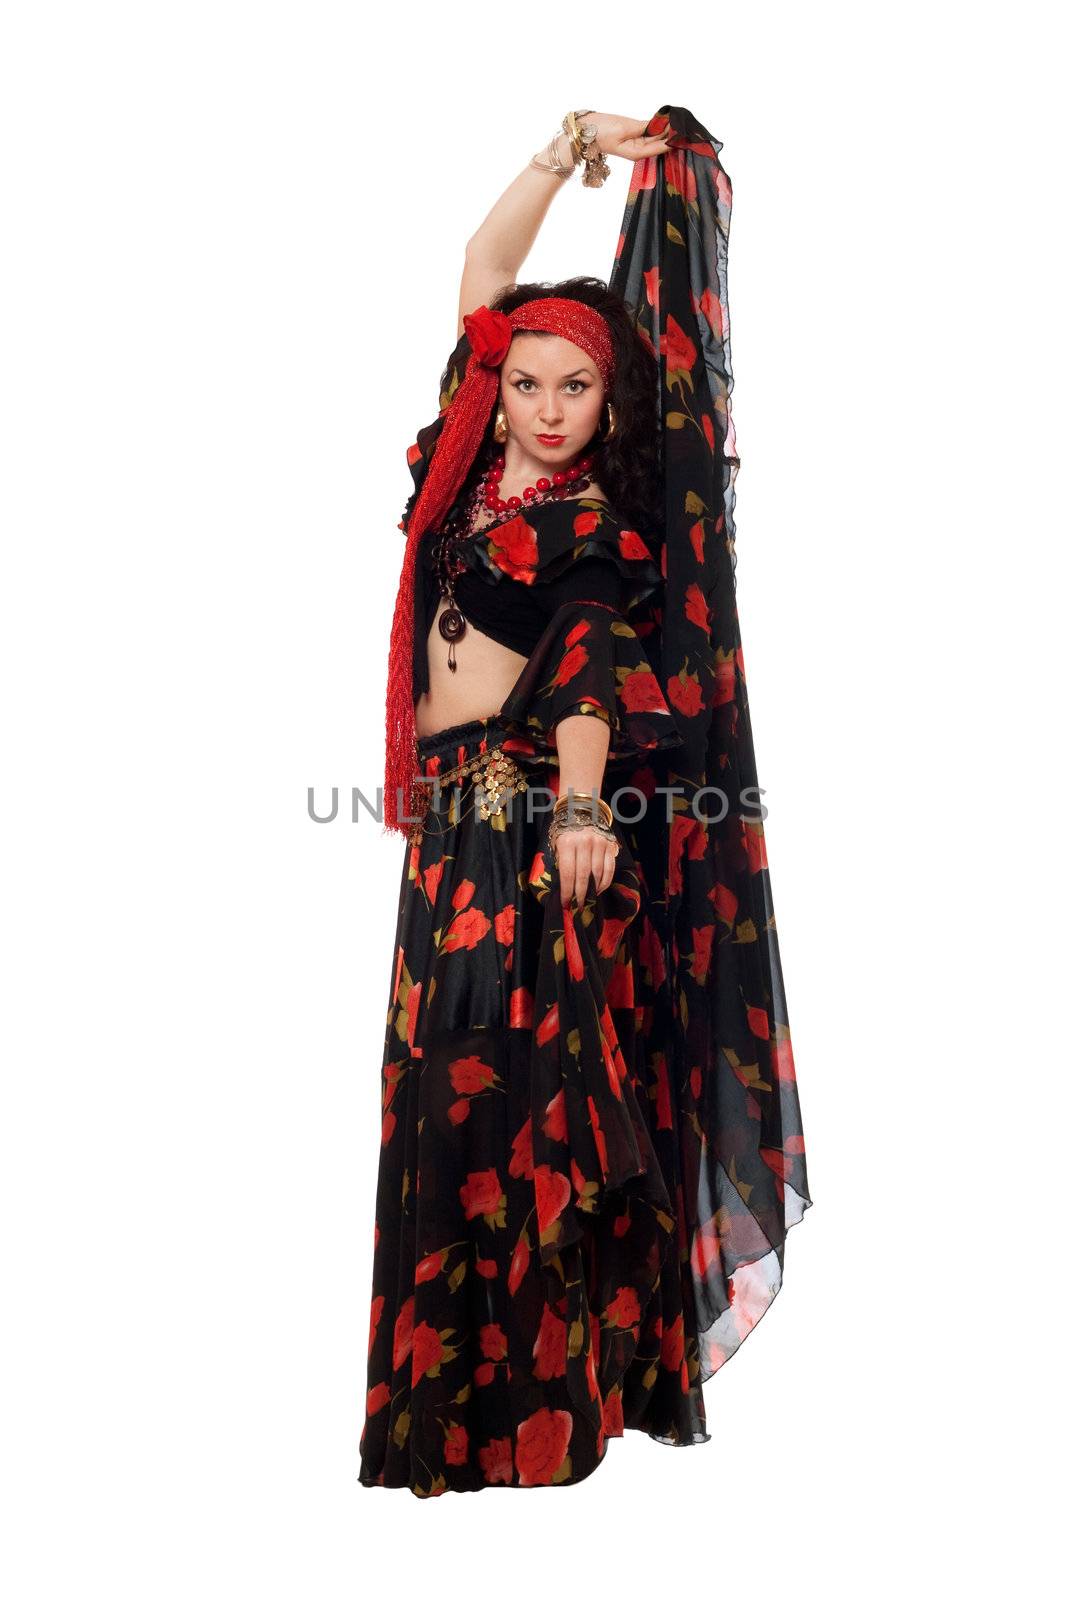 Expressive gypsy woman in a black skirt. Isolated